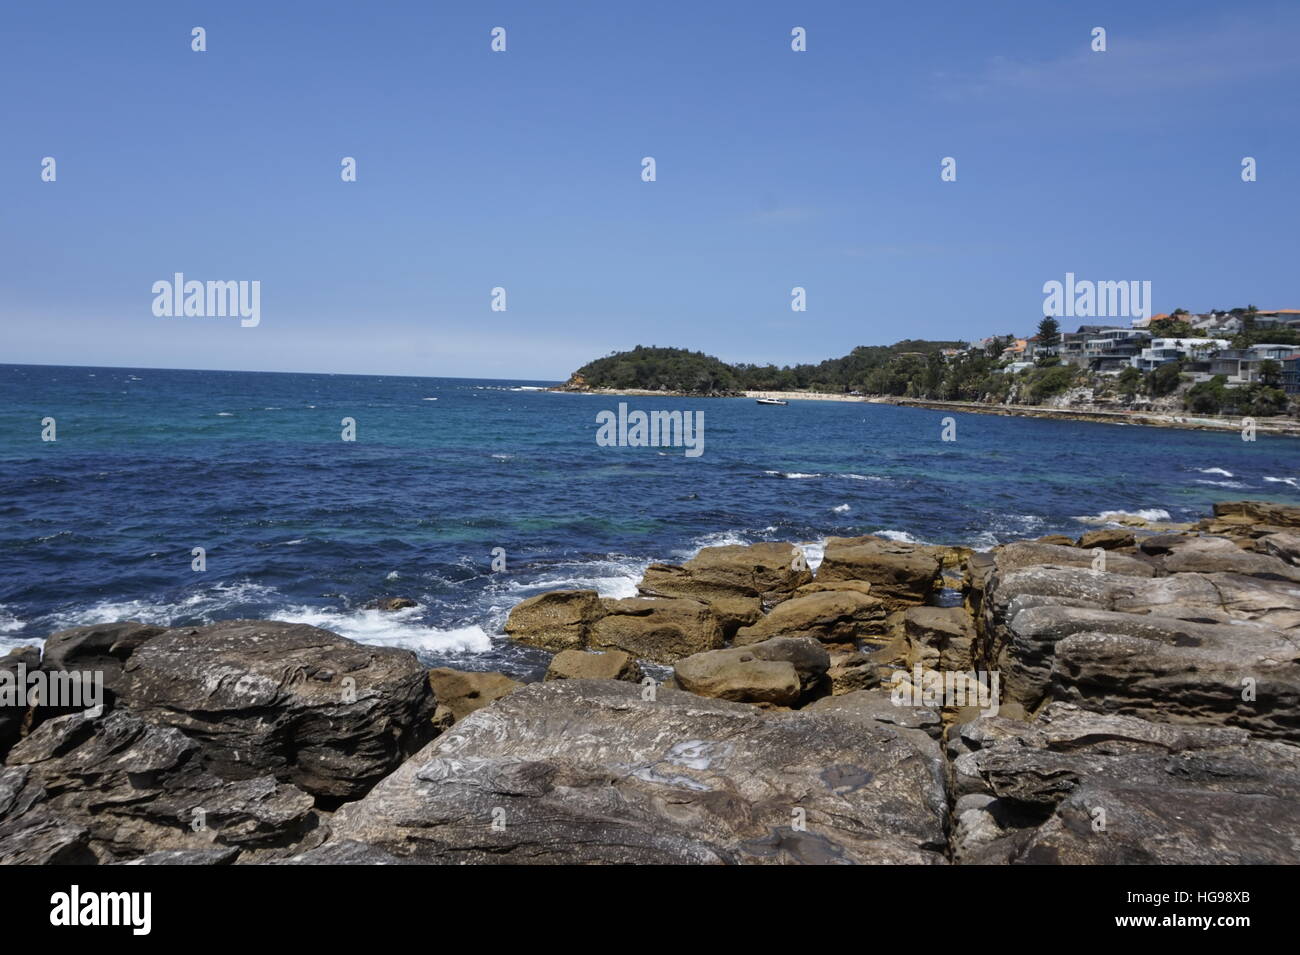 A view from Manly Beach, Sydney, Australia, Stock Photo